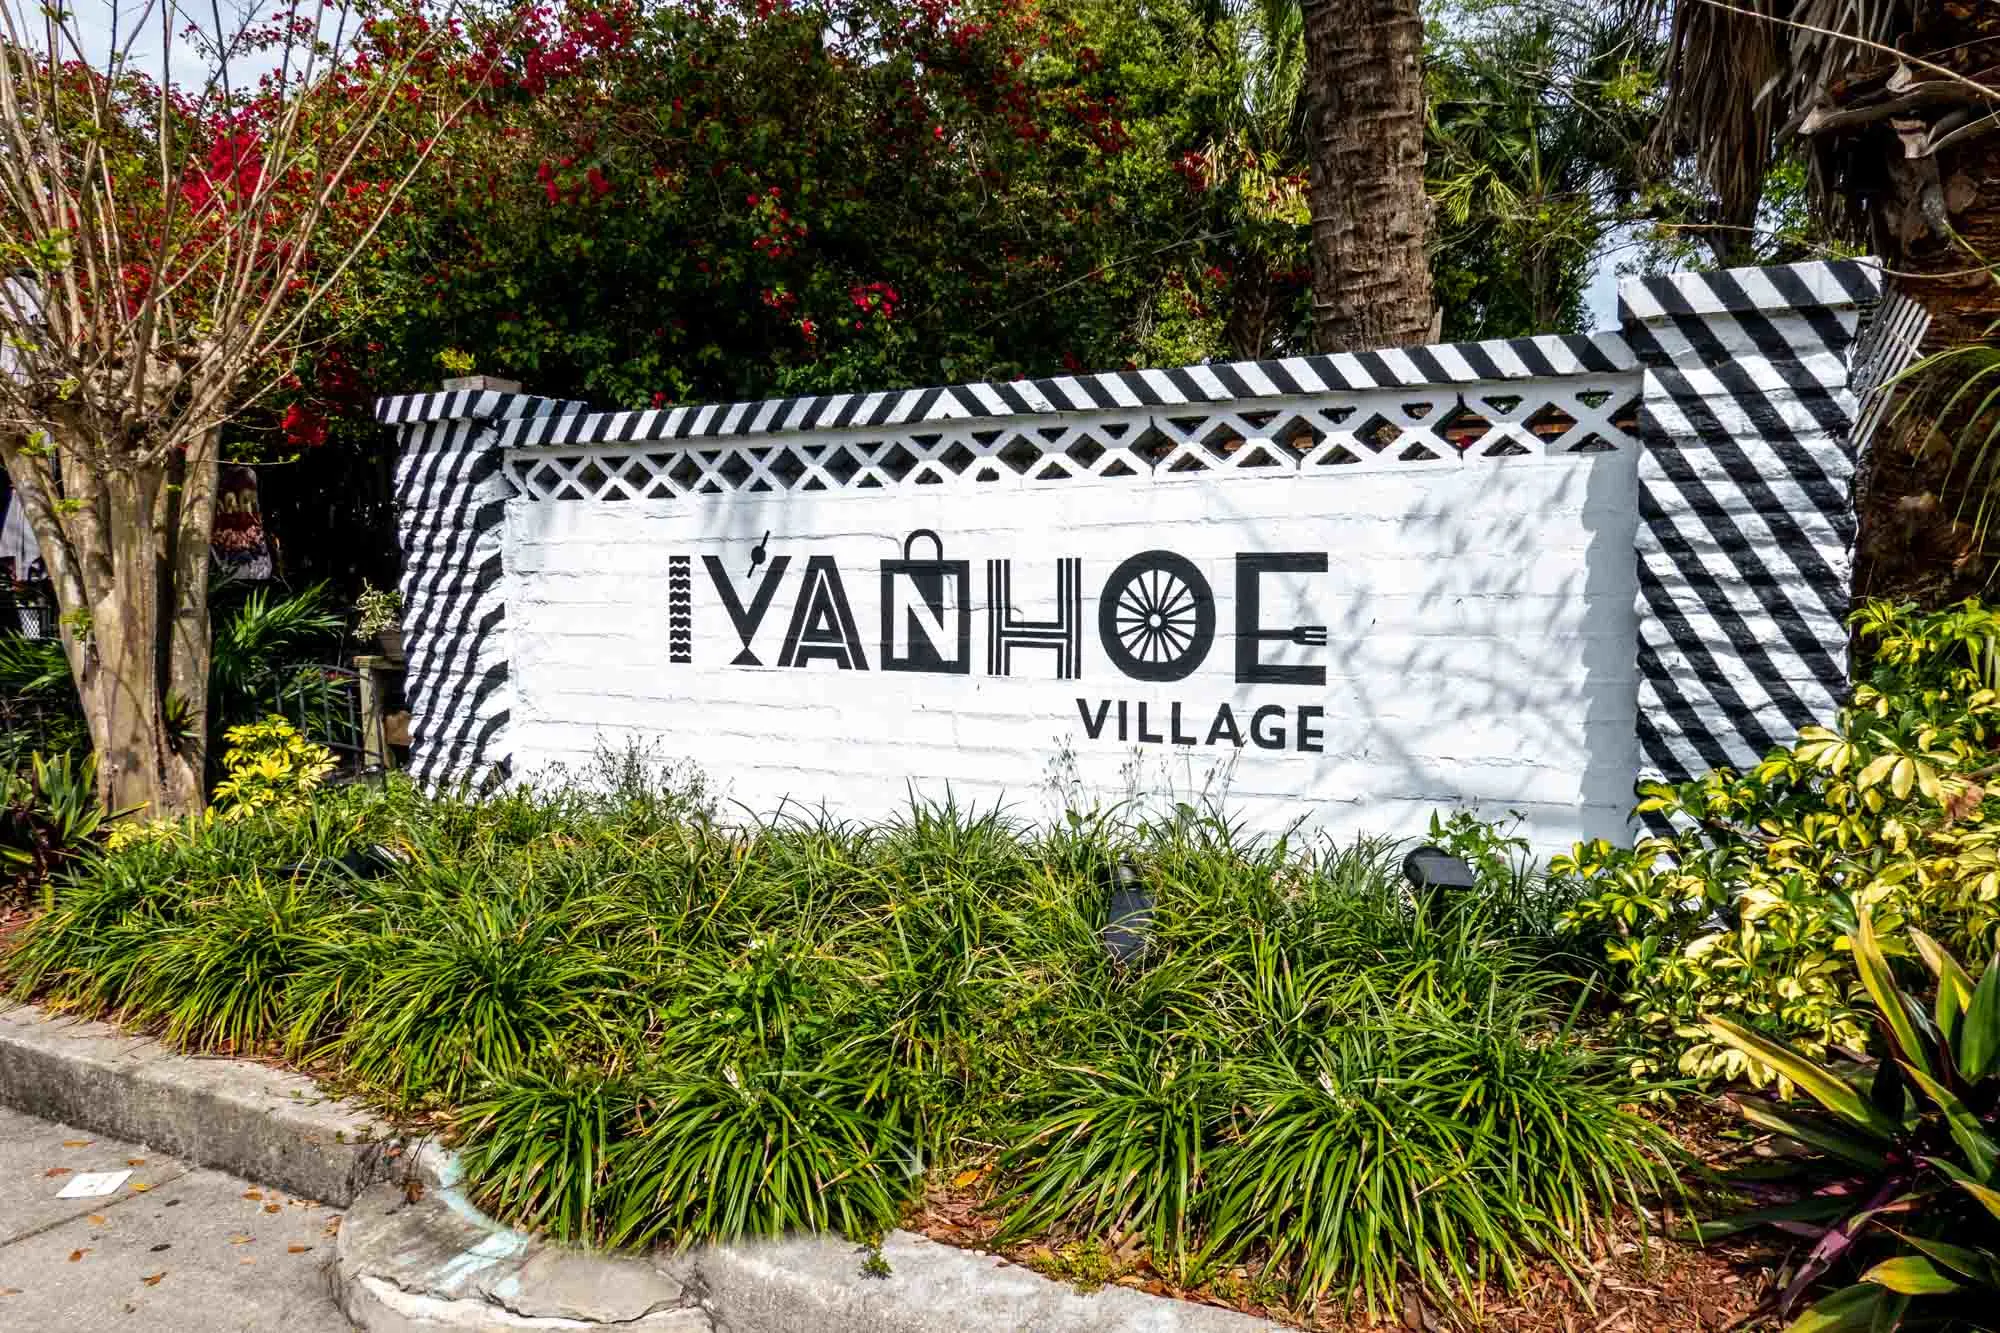 Black and white brick wall painted with a sign for "Ivanhoe Village"